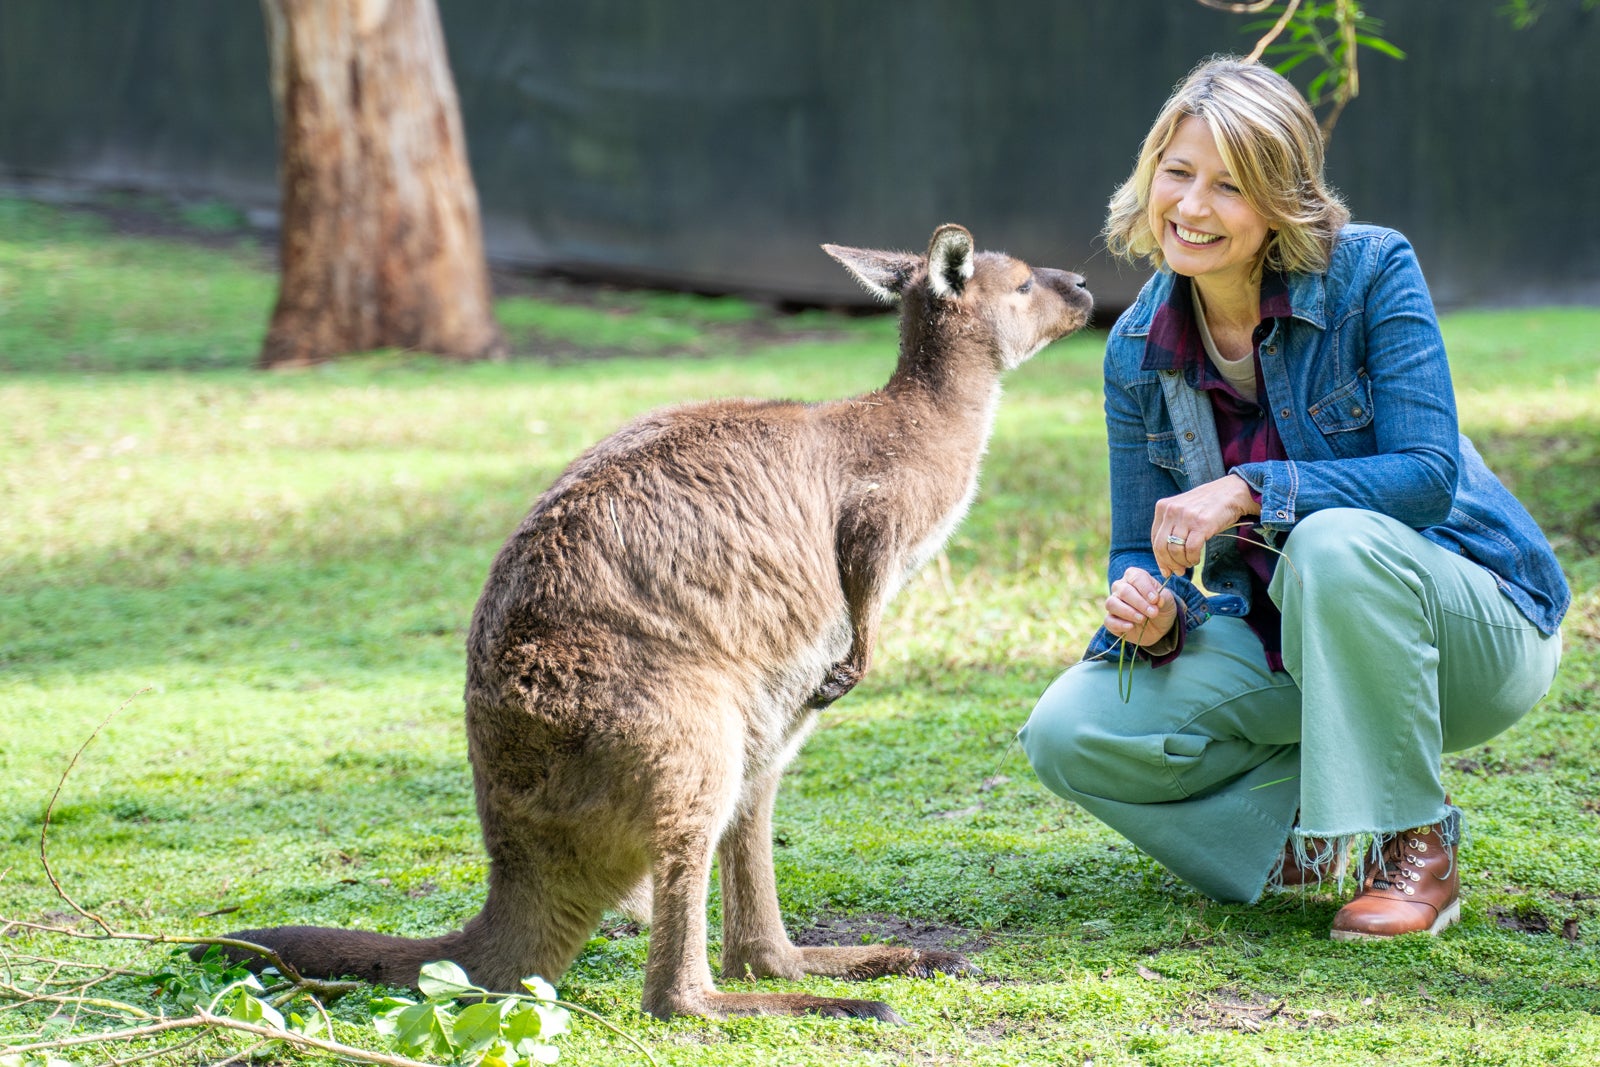 TV host Samantha Brown shares top travel tips and trends ahead of 7th season of ‘Places to Love’